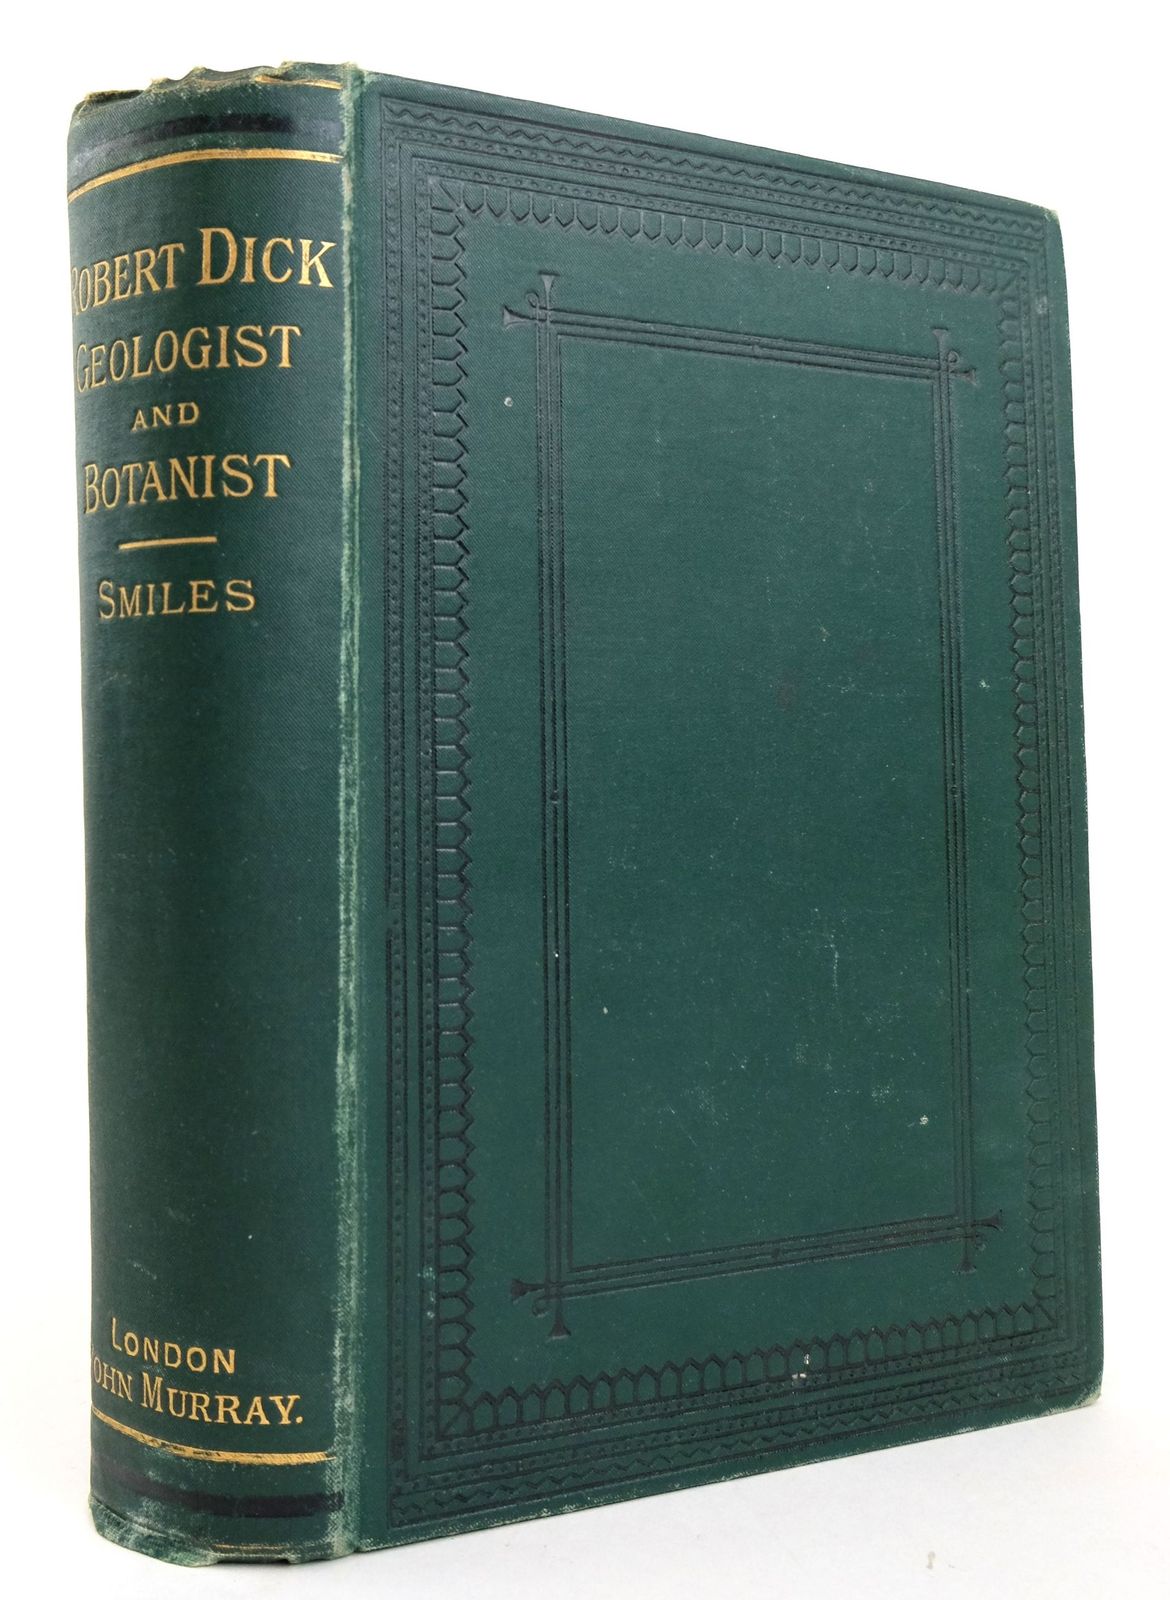 Photo of ROBERT DICK GEOLOGIST & BOTANIST written by Smiles, Samuel published by John Murray (STOCK CODE: 1820167)  for sale by Stella & Rose's Books